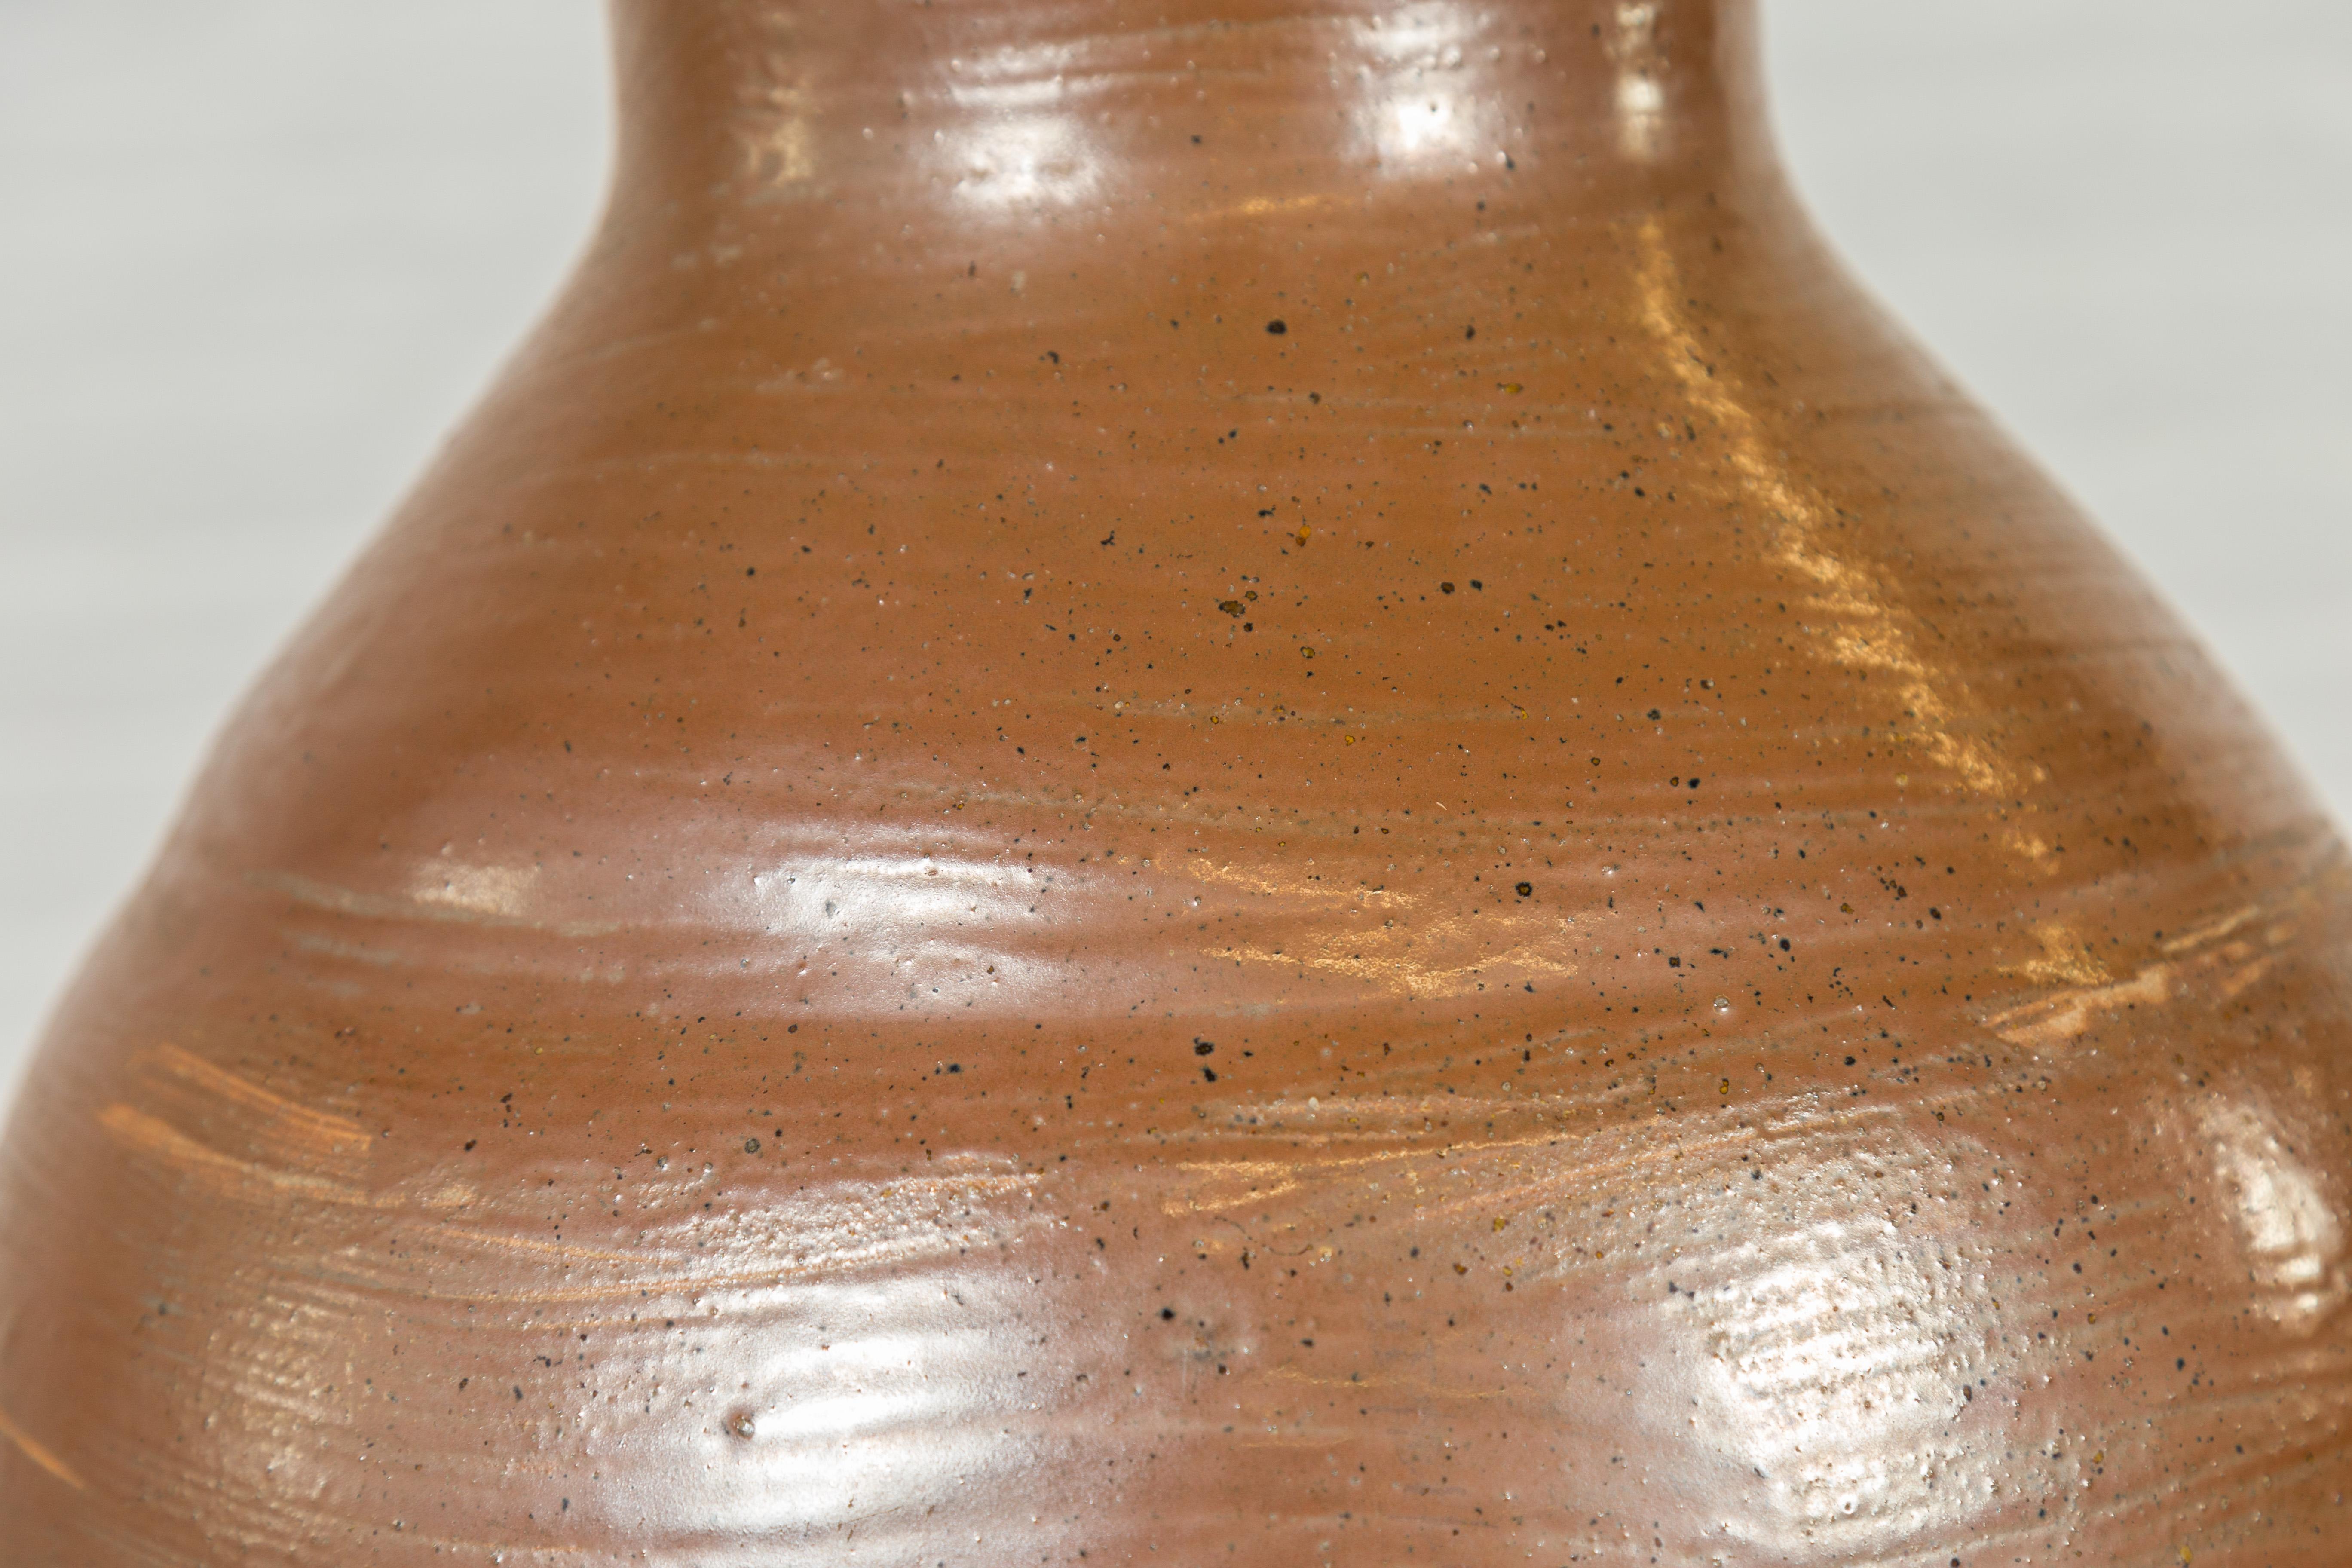 Japanese Meiji Period 19th century Water Jar with Brown Monochrome Patina For Sale 2